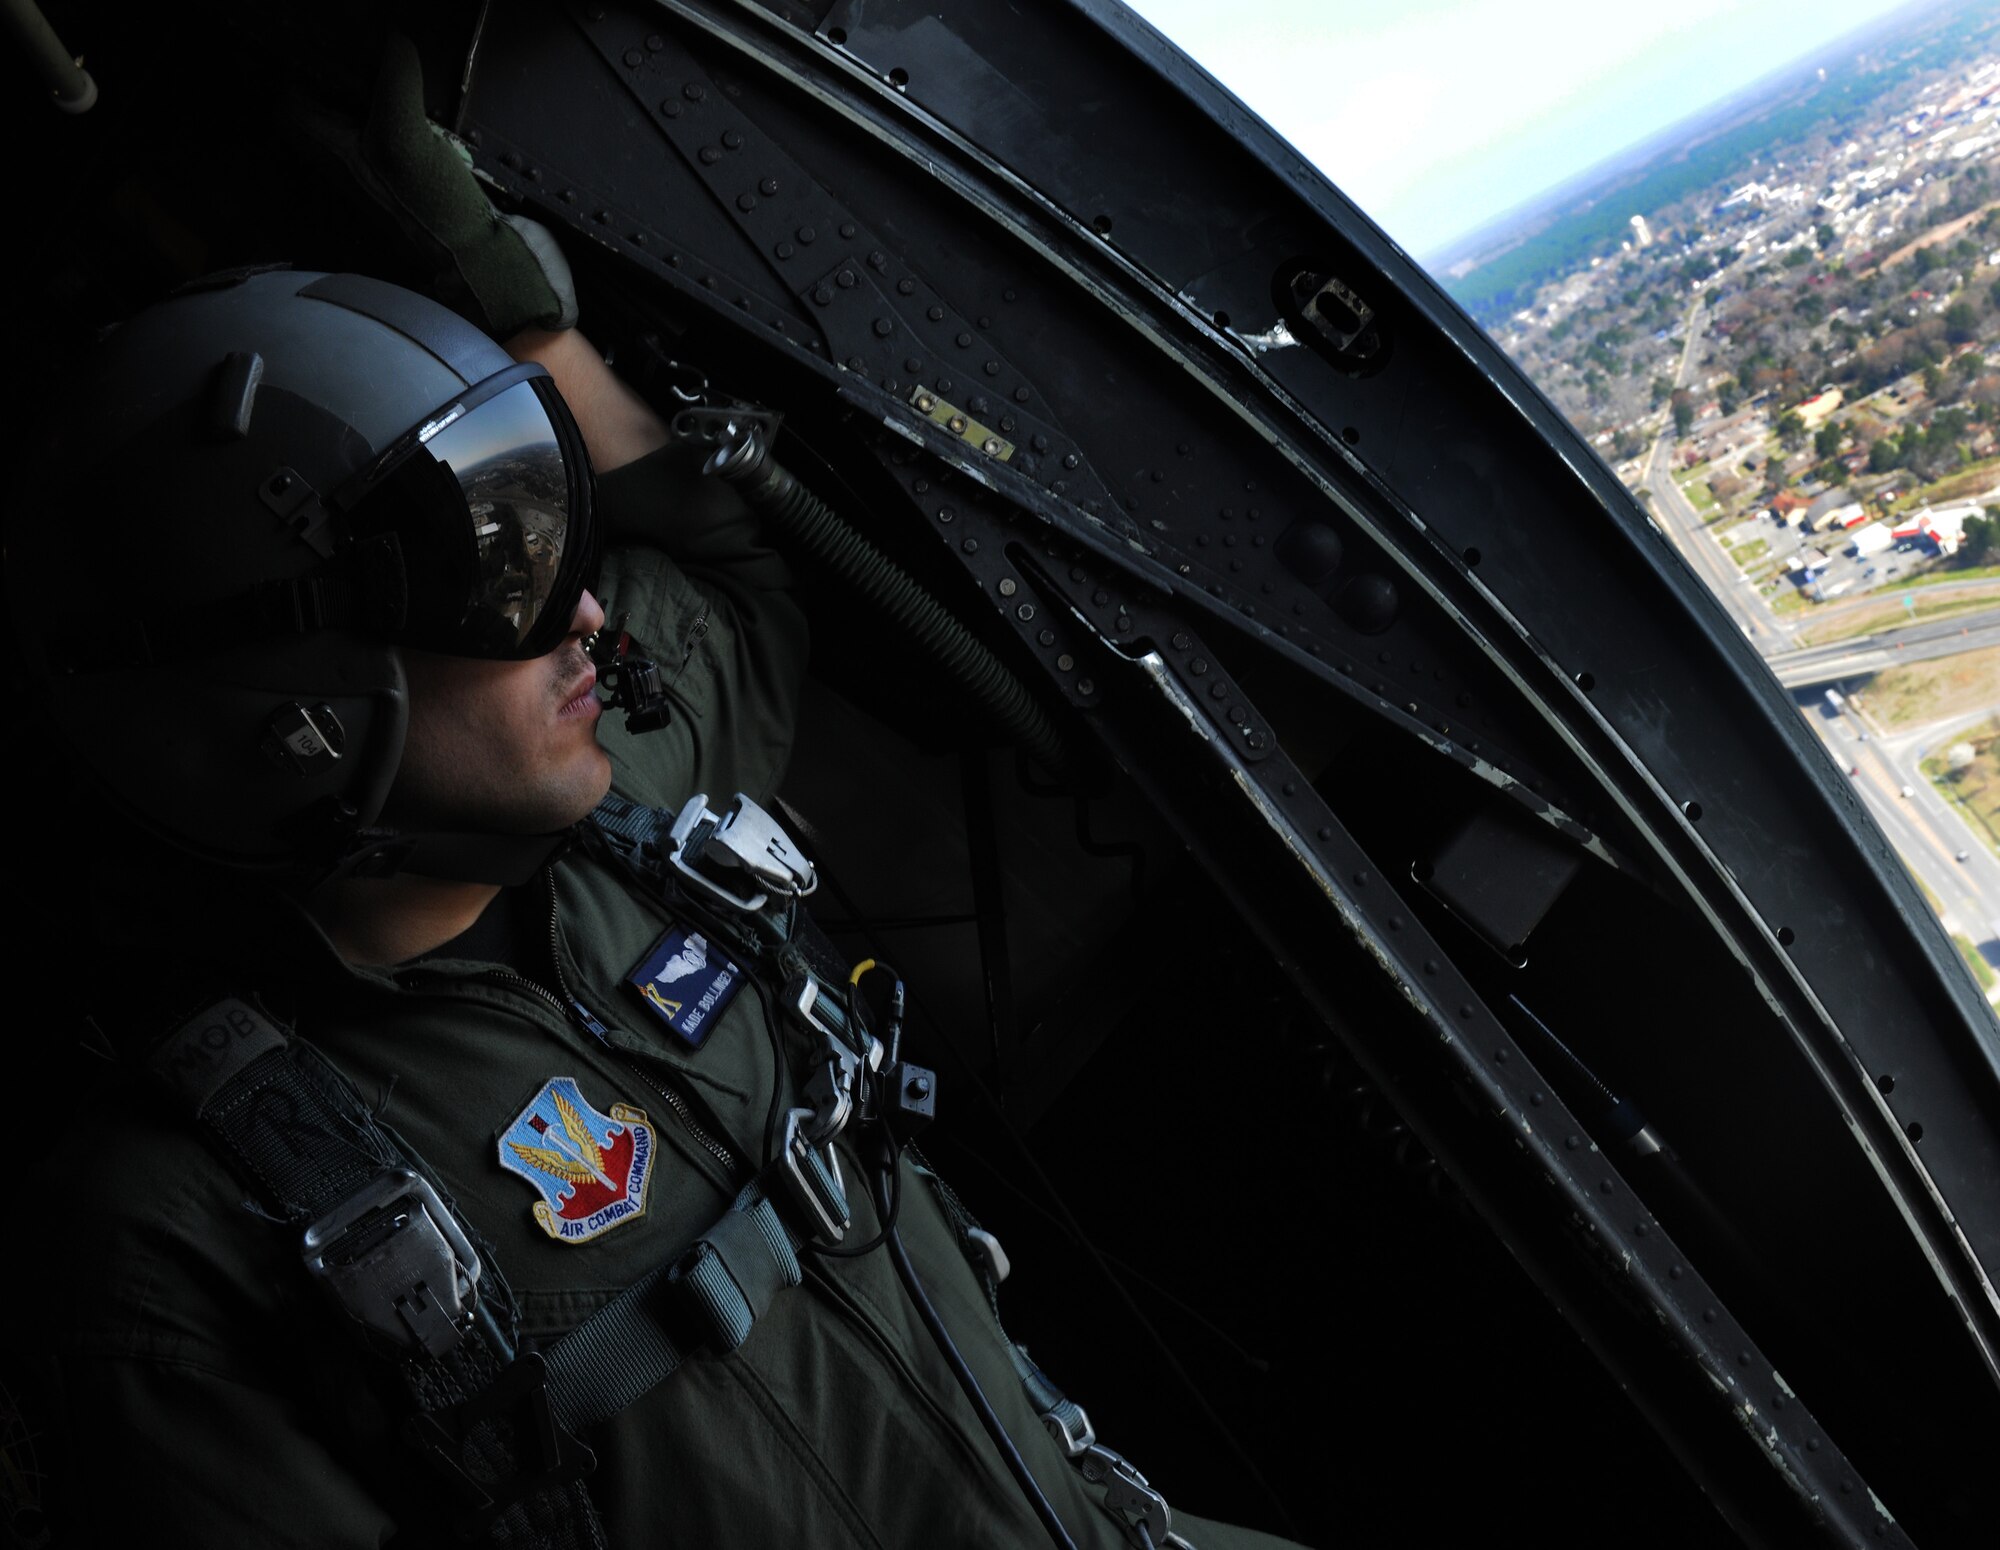 MOODY AIR FORCE BASE, Ga. -- Senior Airman Kade Bollinger, 71st Rescue Squadron HC-130P/N Combat King loadmaster, checks the engine pods  while looking out the paratroop doors during a flight training session here March 16. The Combat King is used for many things including personnel recovery and air drops, as well as humanitarian and combat missions. (U.S. Air Force photo by Airman 1st Class Benjamin Wiseman/Released)